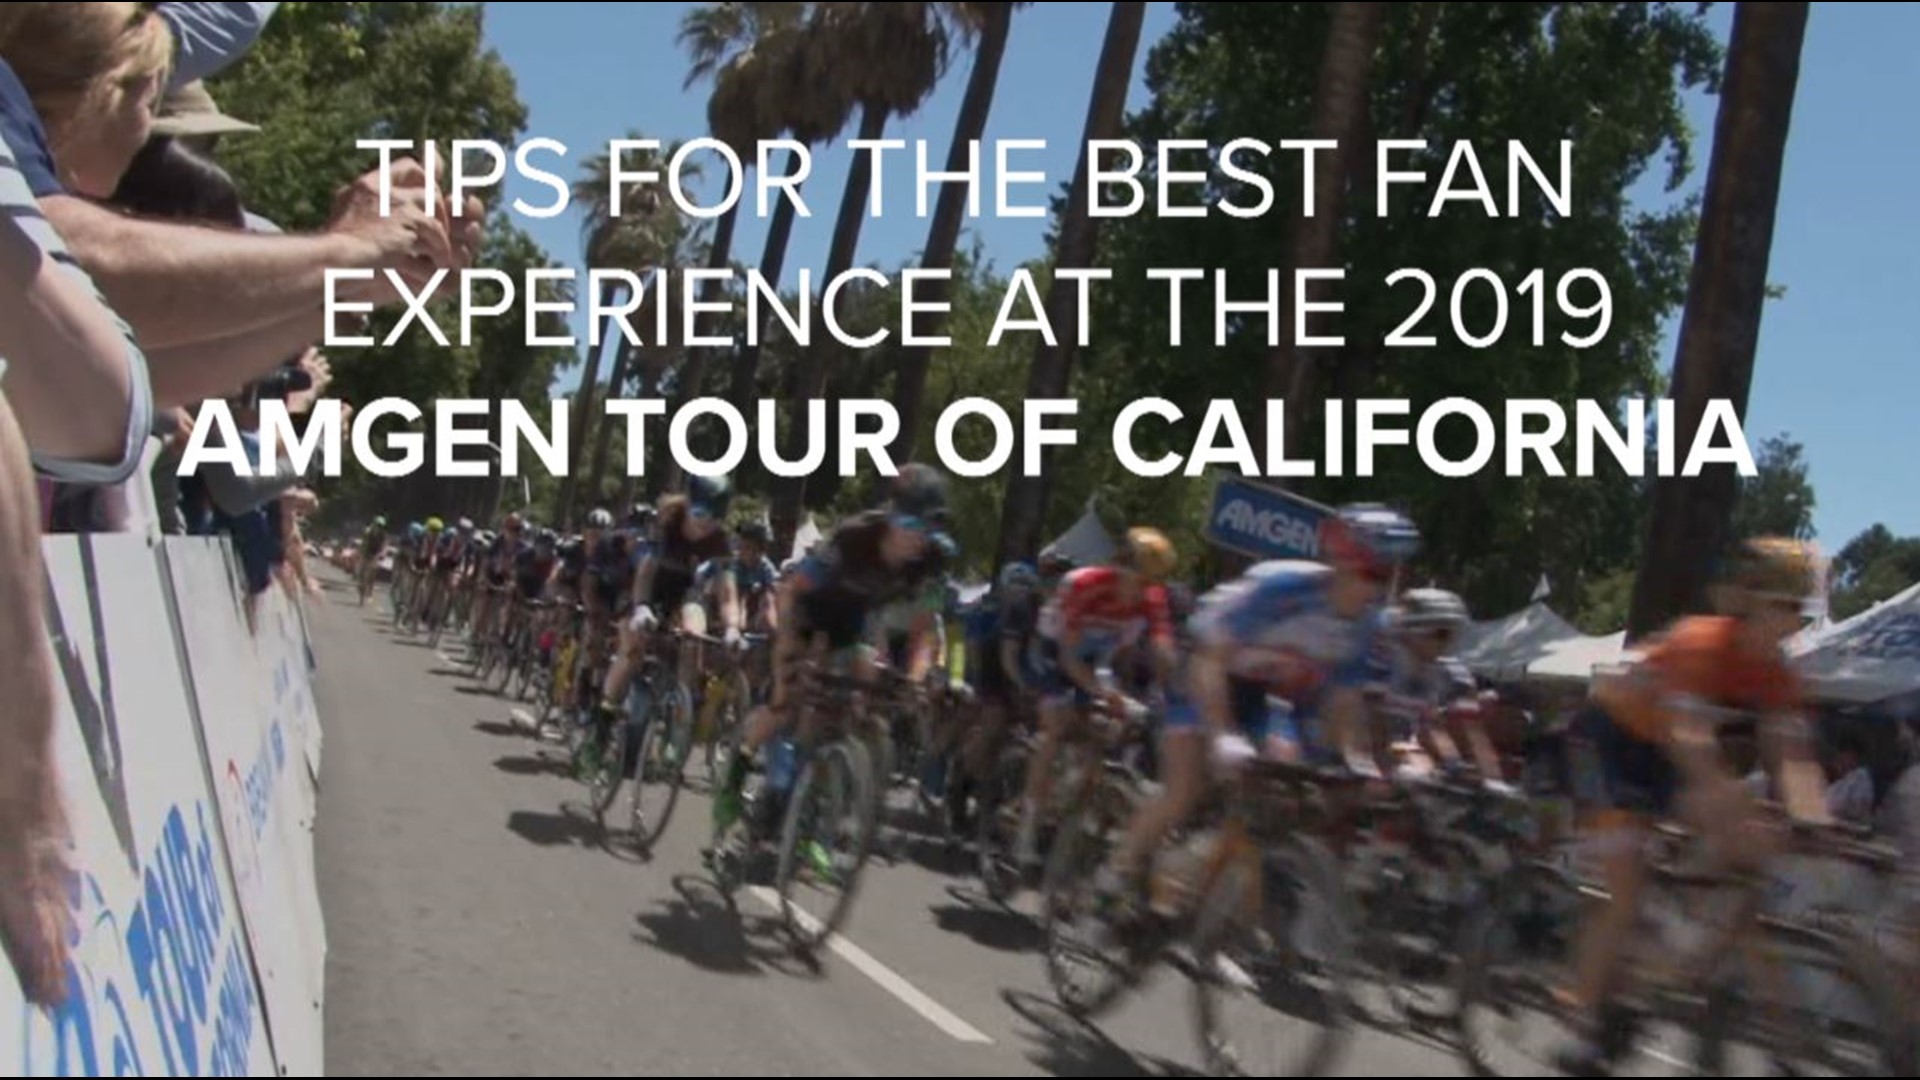 ABC10's Lina Washington explains the best way for fans to enjoy the Amgen Tour of California May 12 - 18 in person.